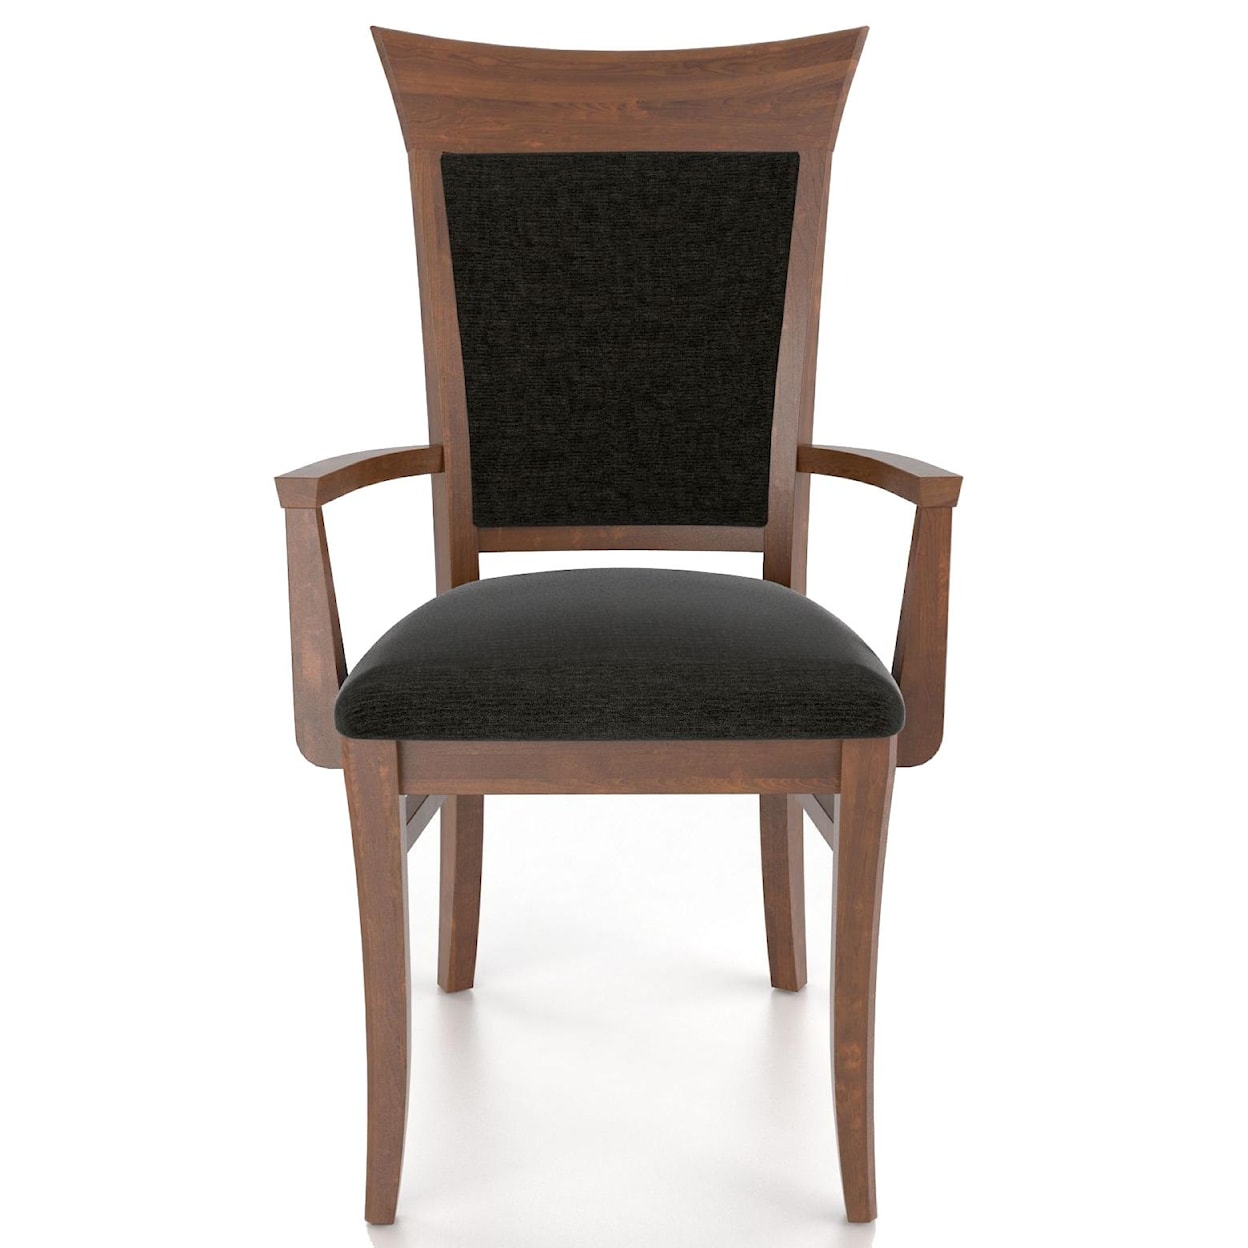 Canadel Canadel Customizable Upholstered Arm Chair